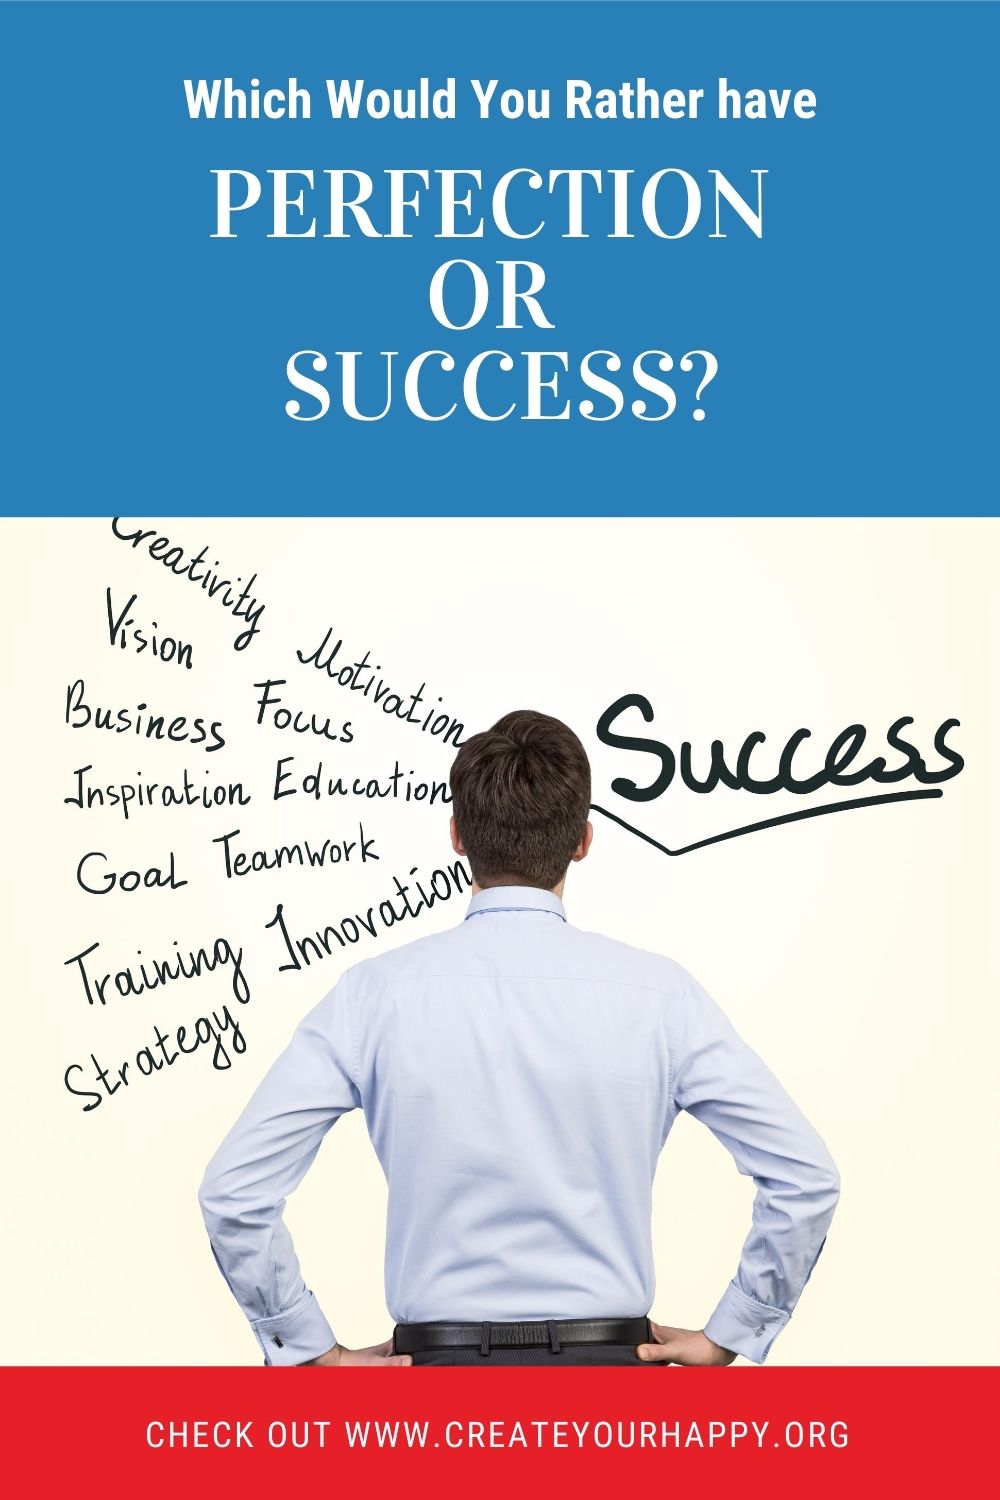 Which Would You Rather Have – Perfection or Success?